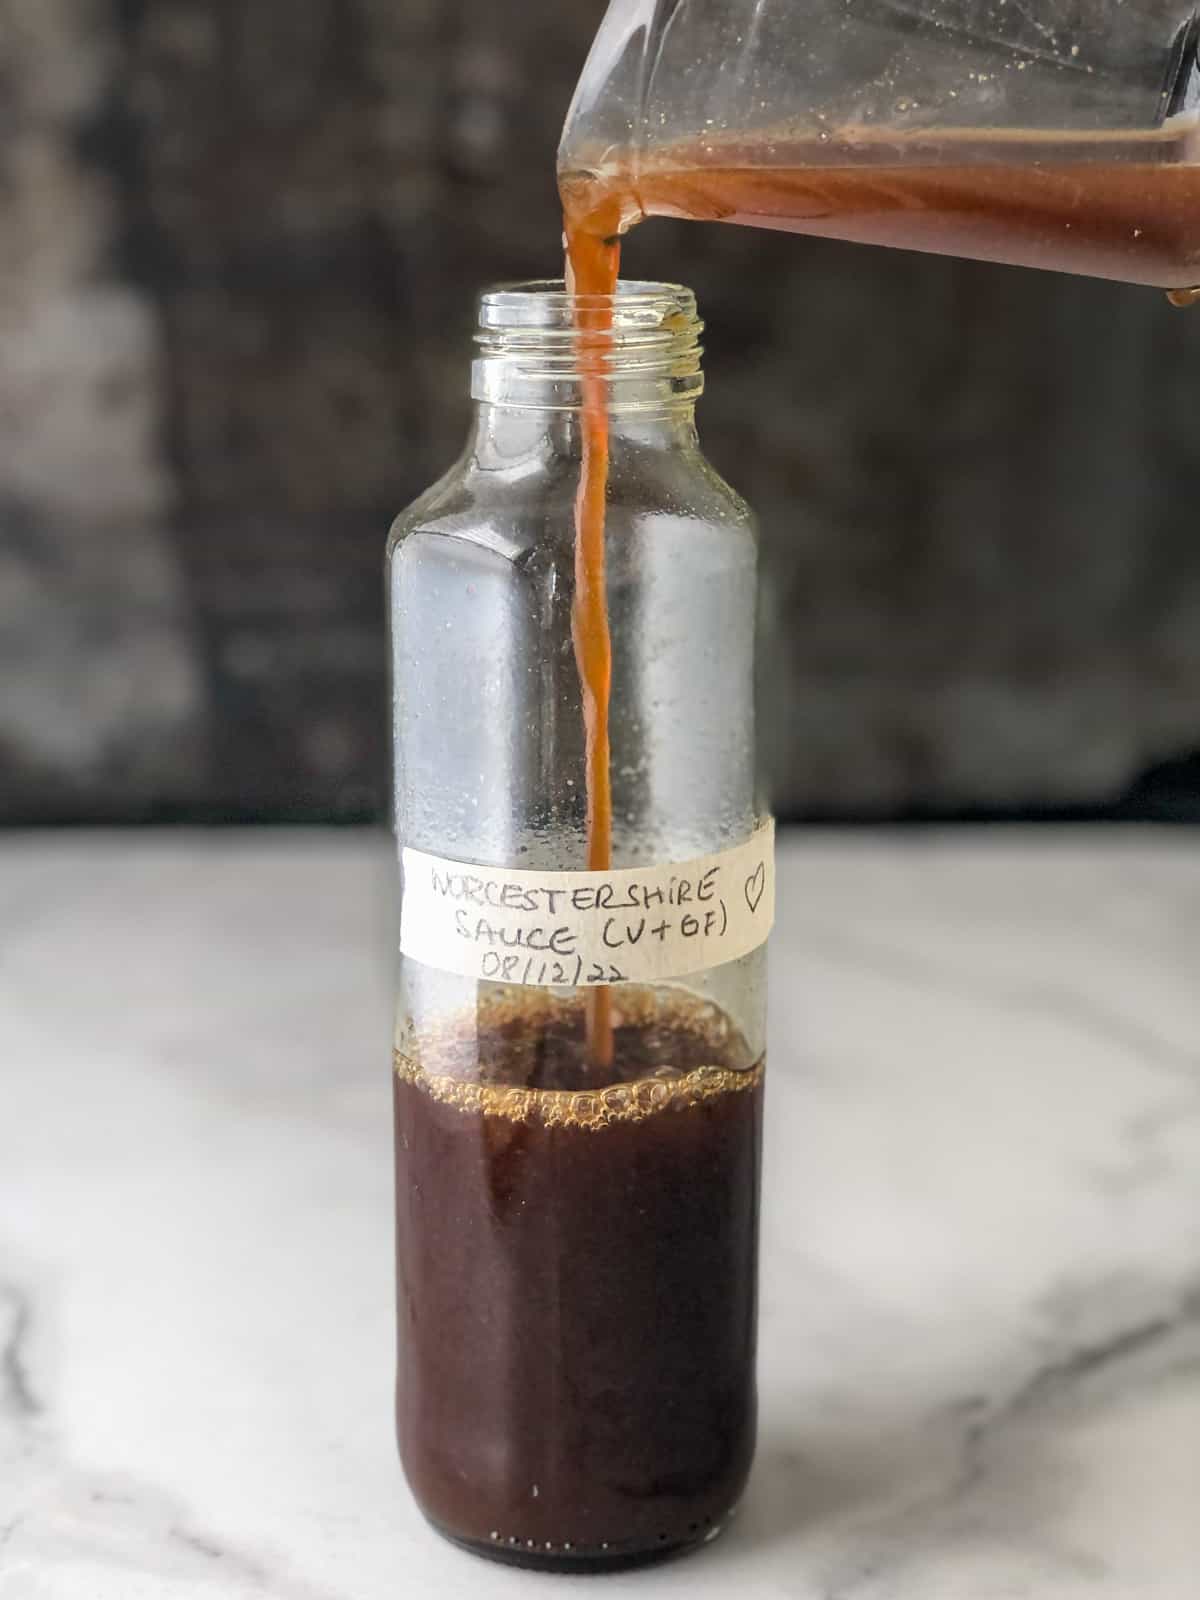 Worcestershire sauce being poured into a bottle.